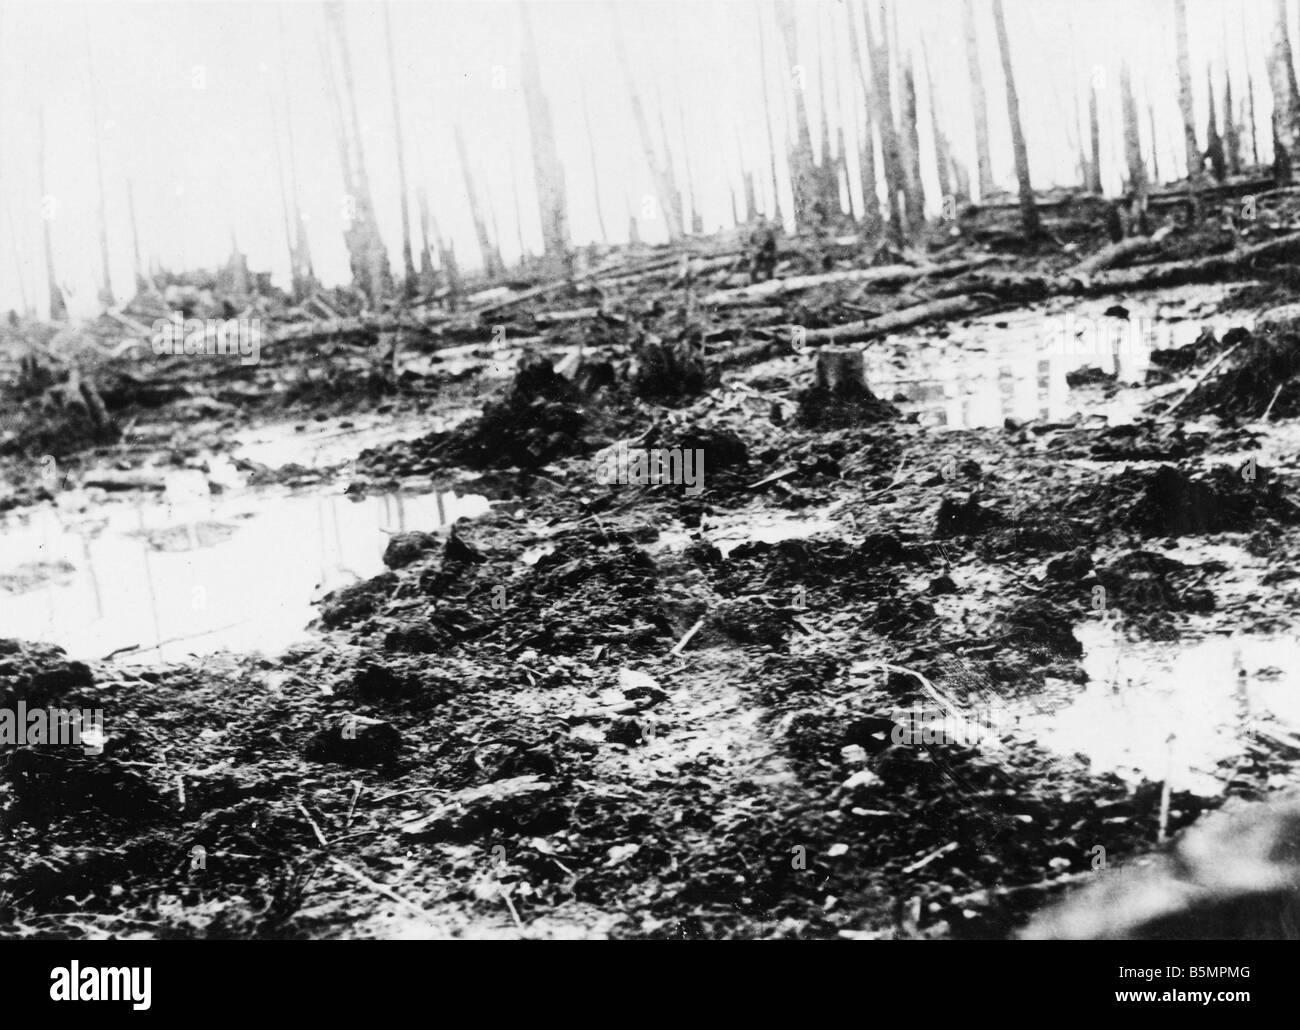 9 1916 3 18 A1 8 E Battle of Postawy 1916 Battlefield World War 1 Eastern Front Defeat of Russian troops after an offensive on t Stock Photo